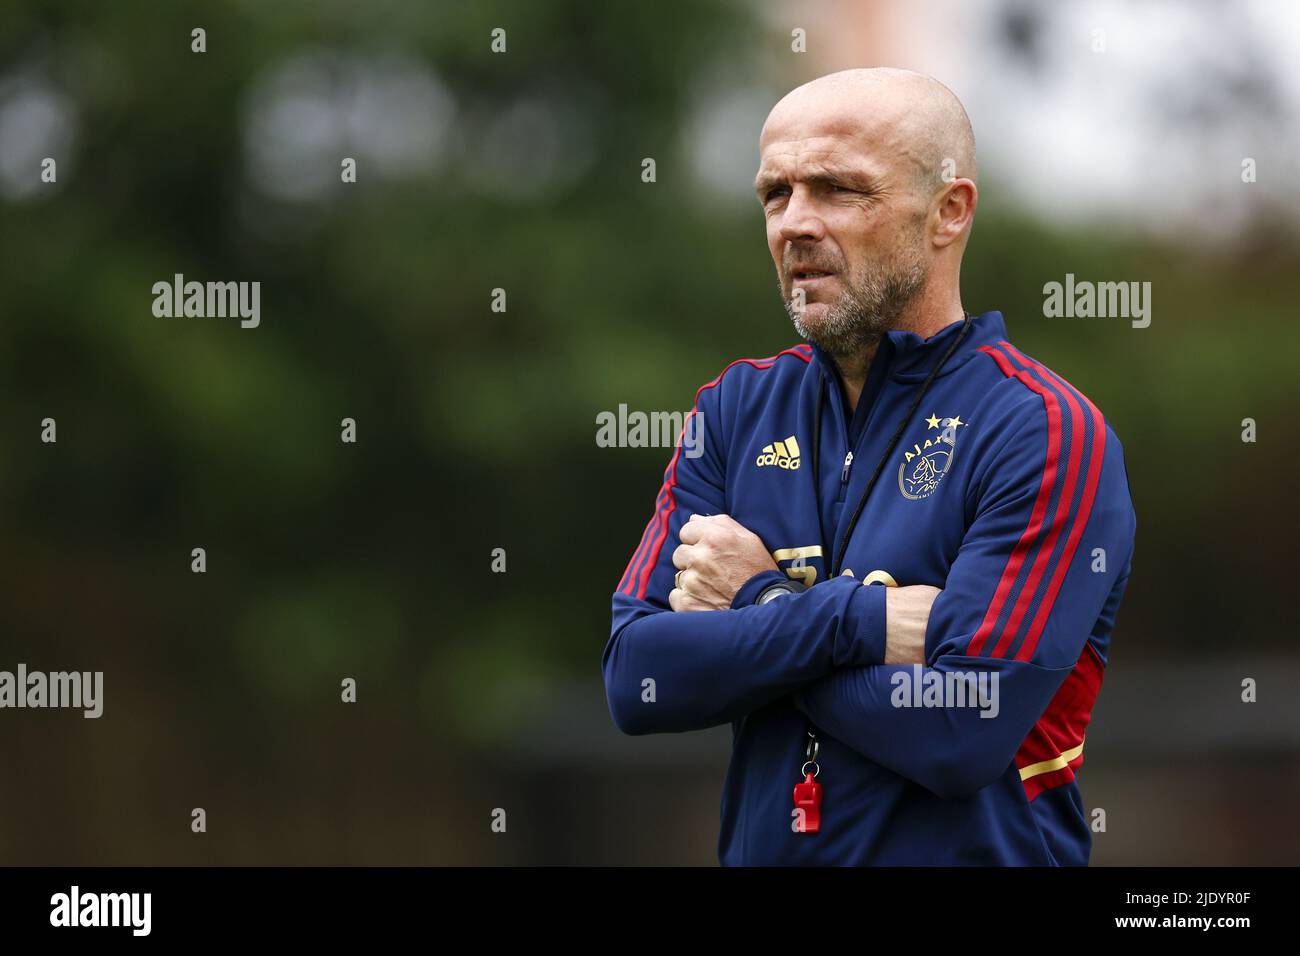 AMSTERDAM - Ajax coach Alfred Schreuder during the first training session of Ajax Amsterdam at sports complex De Toekomst on June 24, 2022 in Amsterdam, the Netherlands. ANP MAURICE VAN STEEN Stock Photo